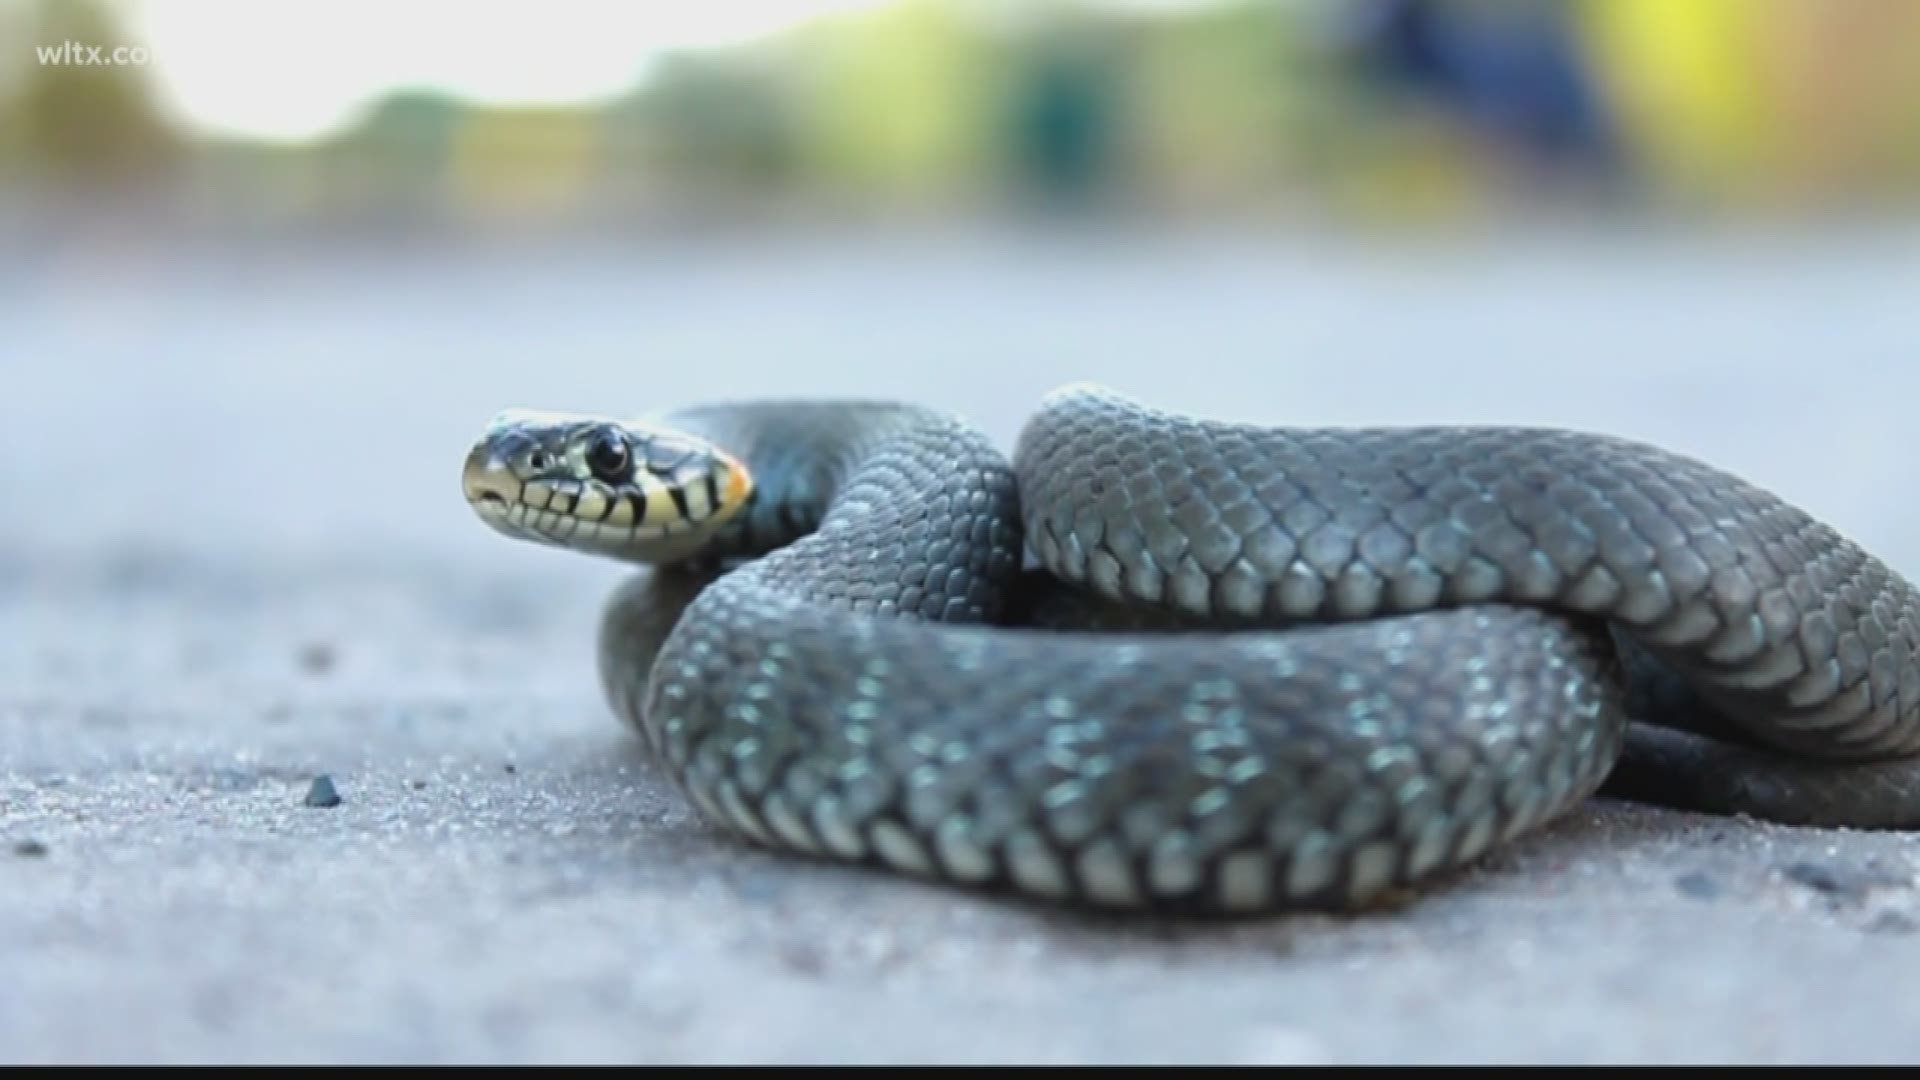 With high heat, snake sightings can increase and here's what you should do